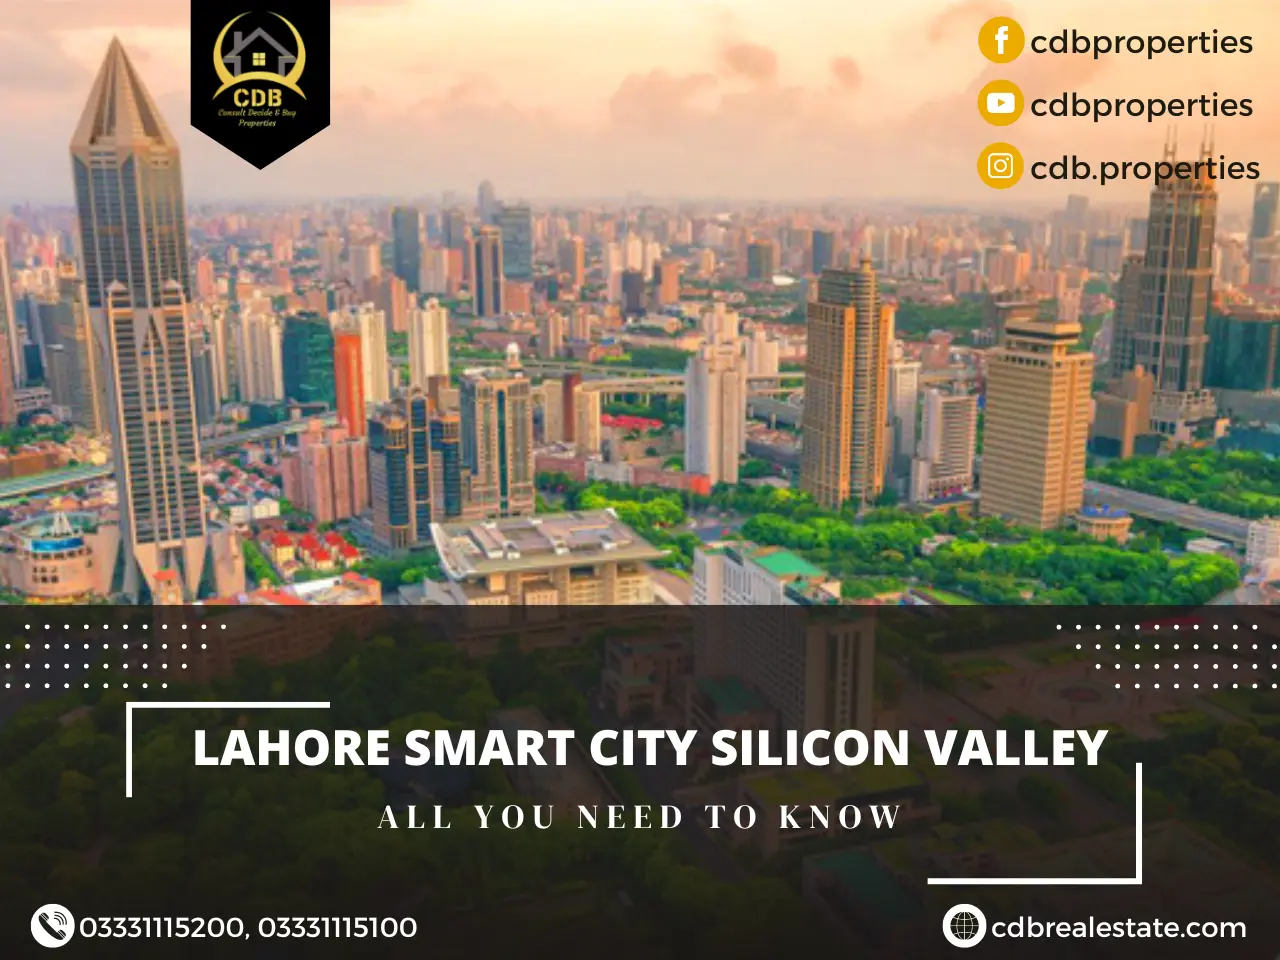 Lahore smart city silicon valley